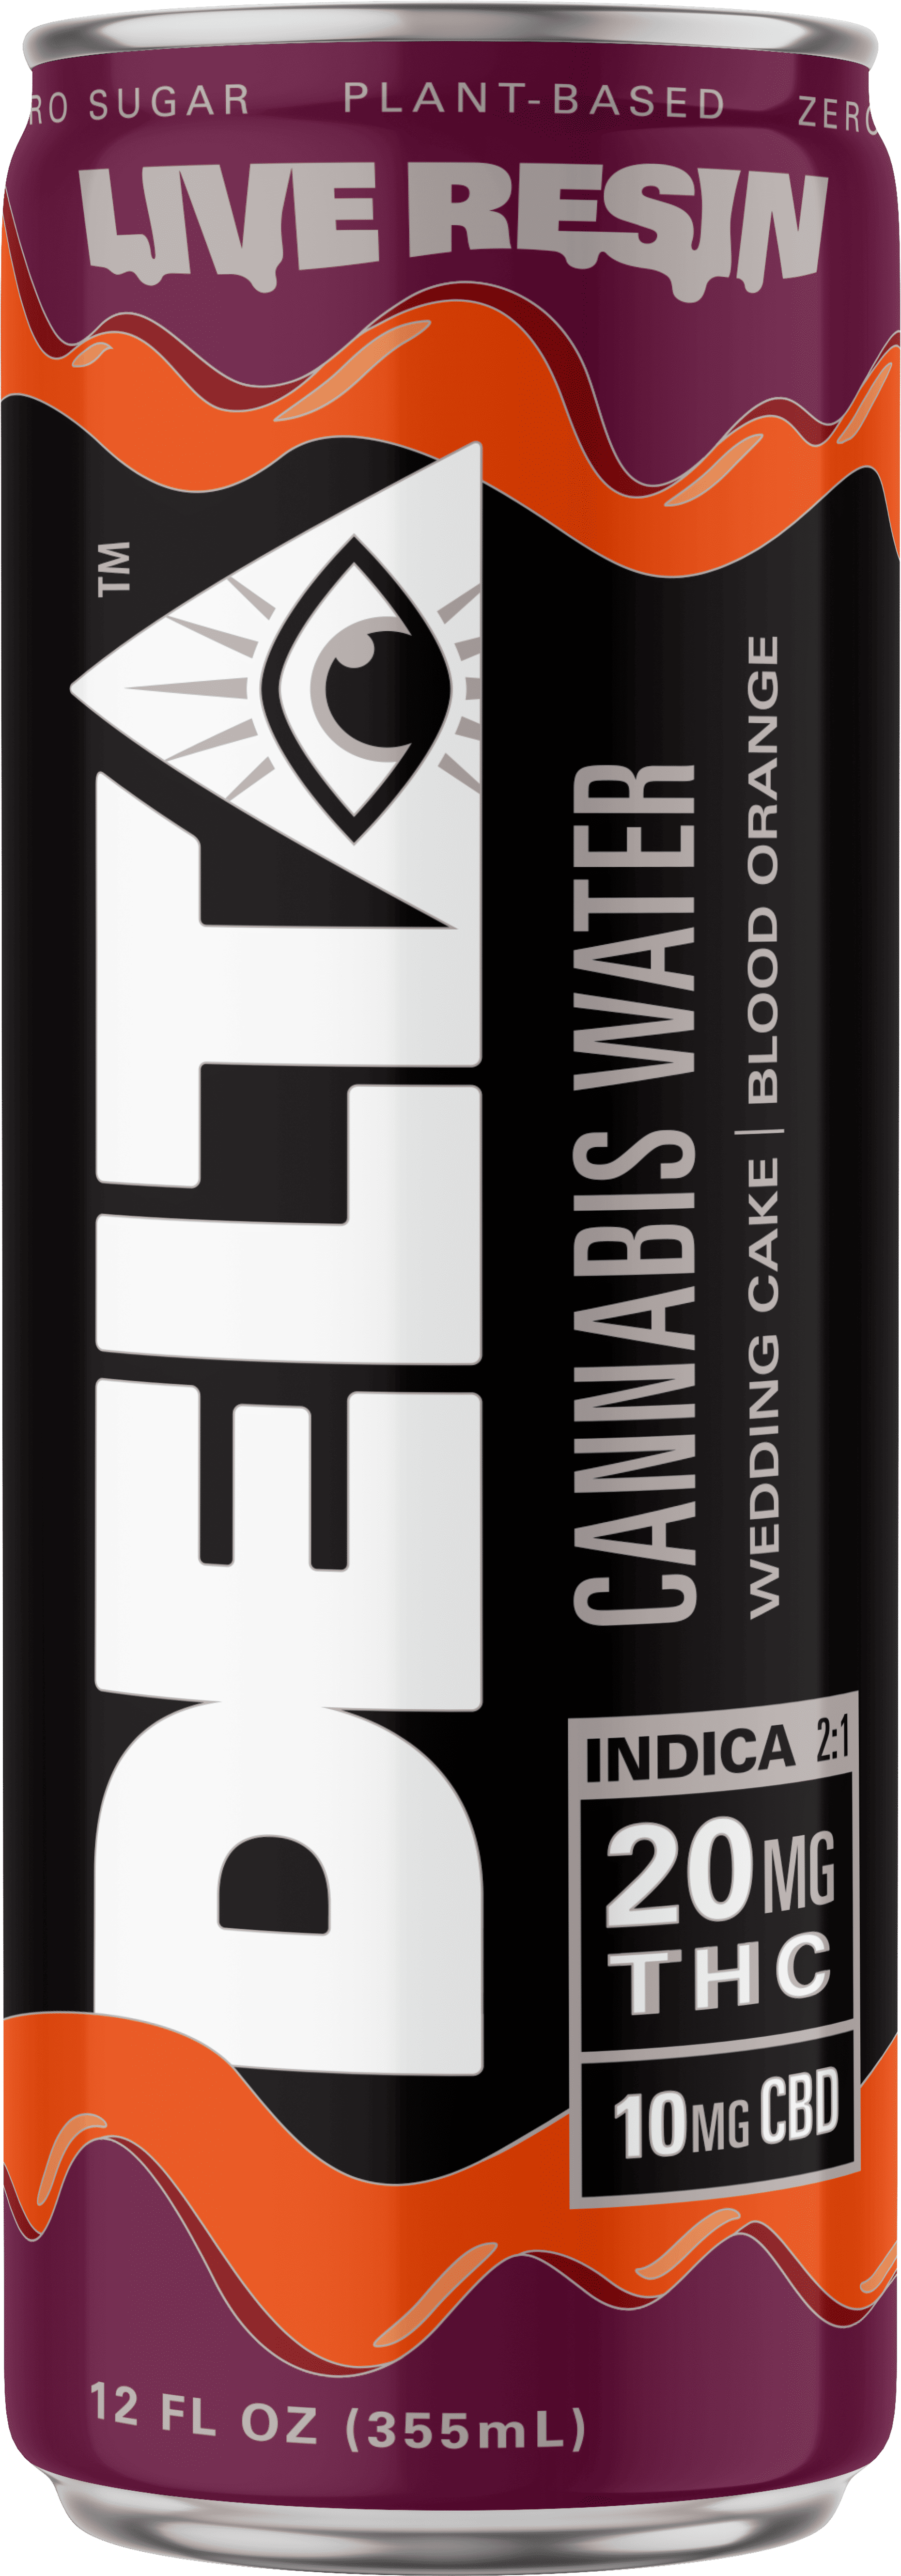 Energy drink with real cannabis taste - So Stoned